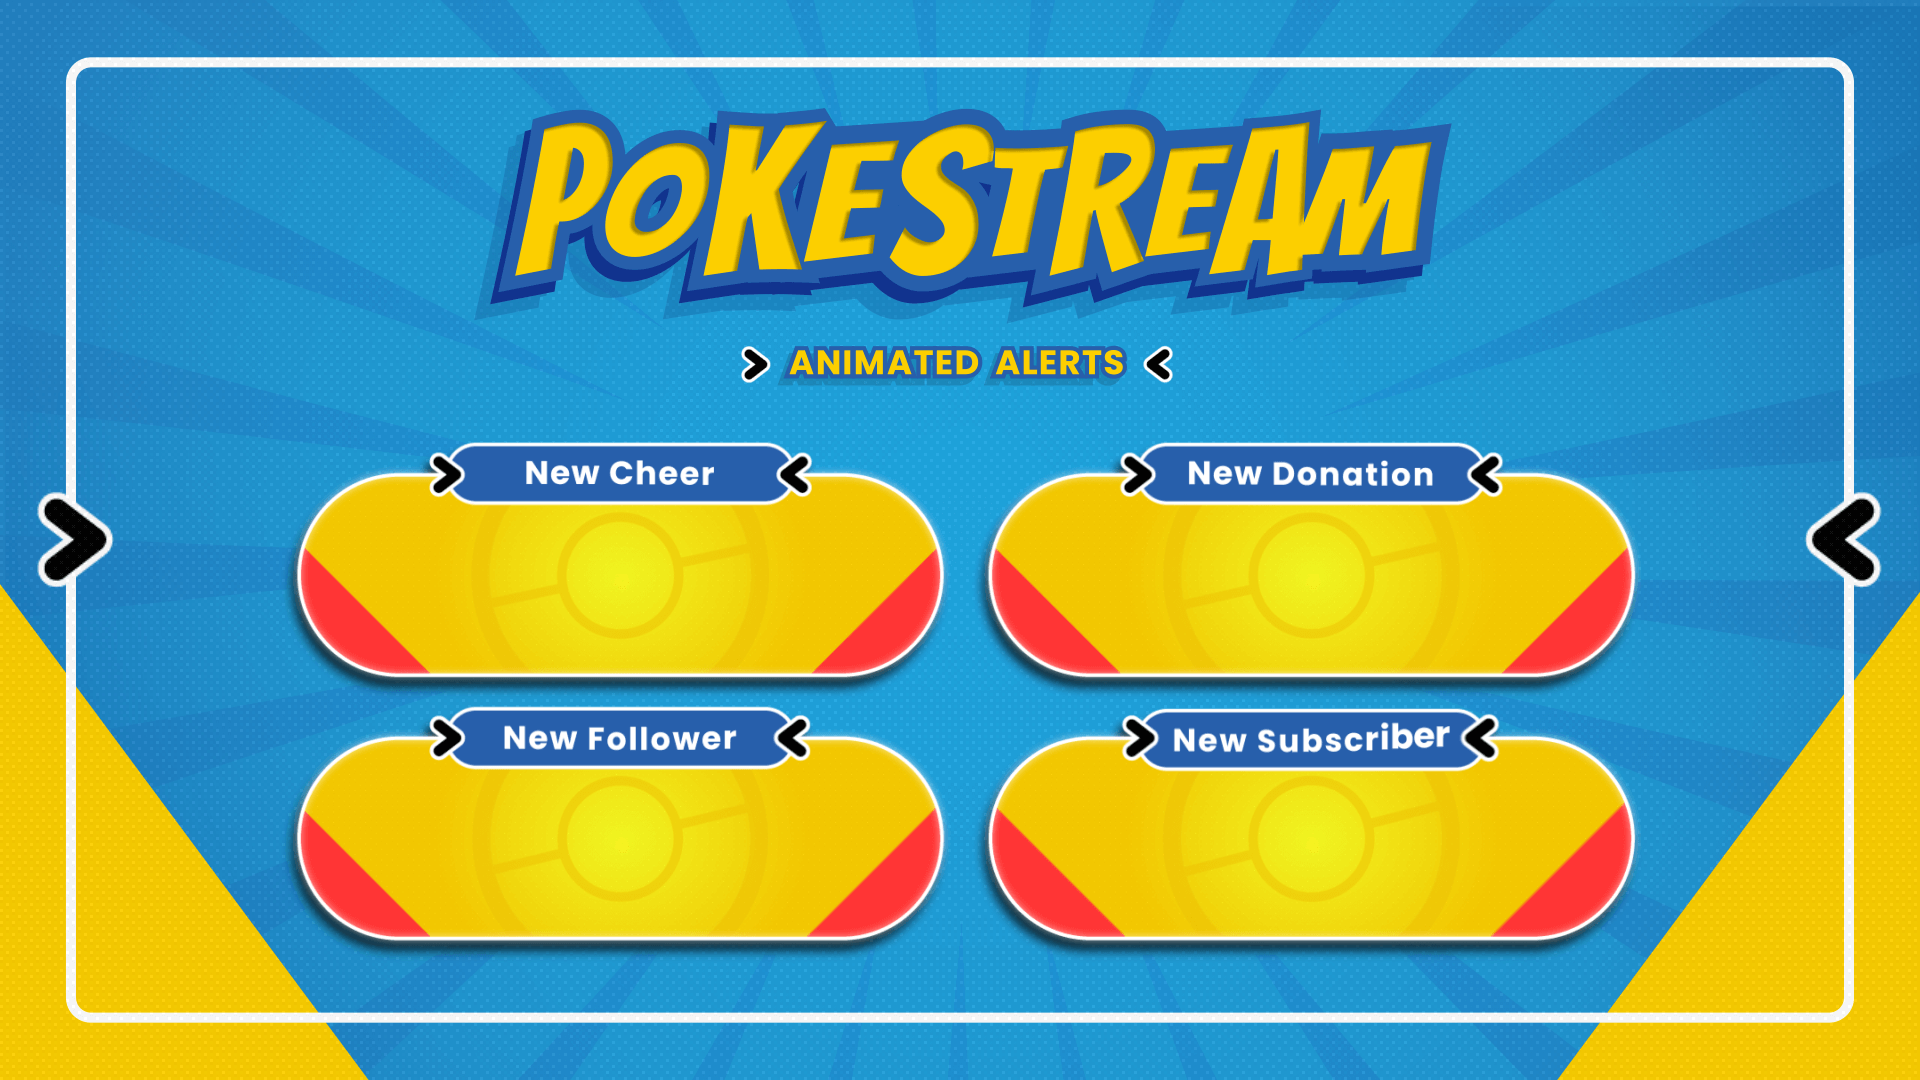 Pokemon Animated Alerts for Twitch, Youtube and Facebook Gaming